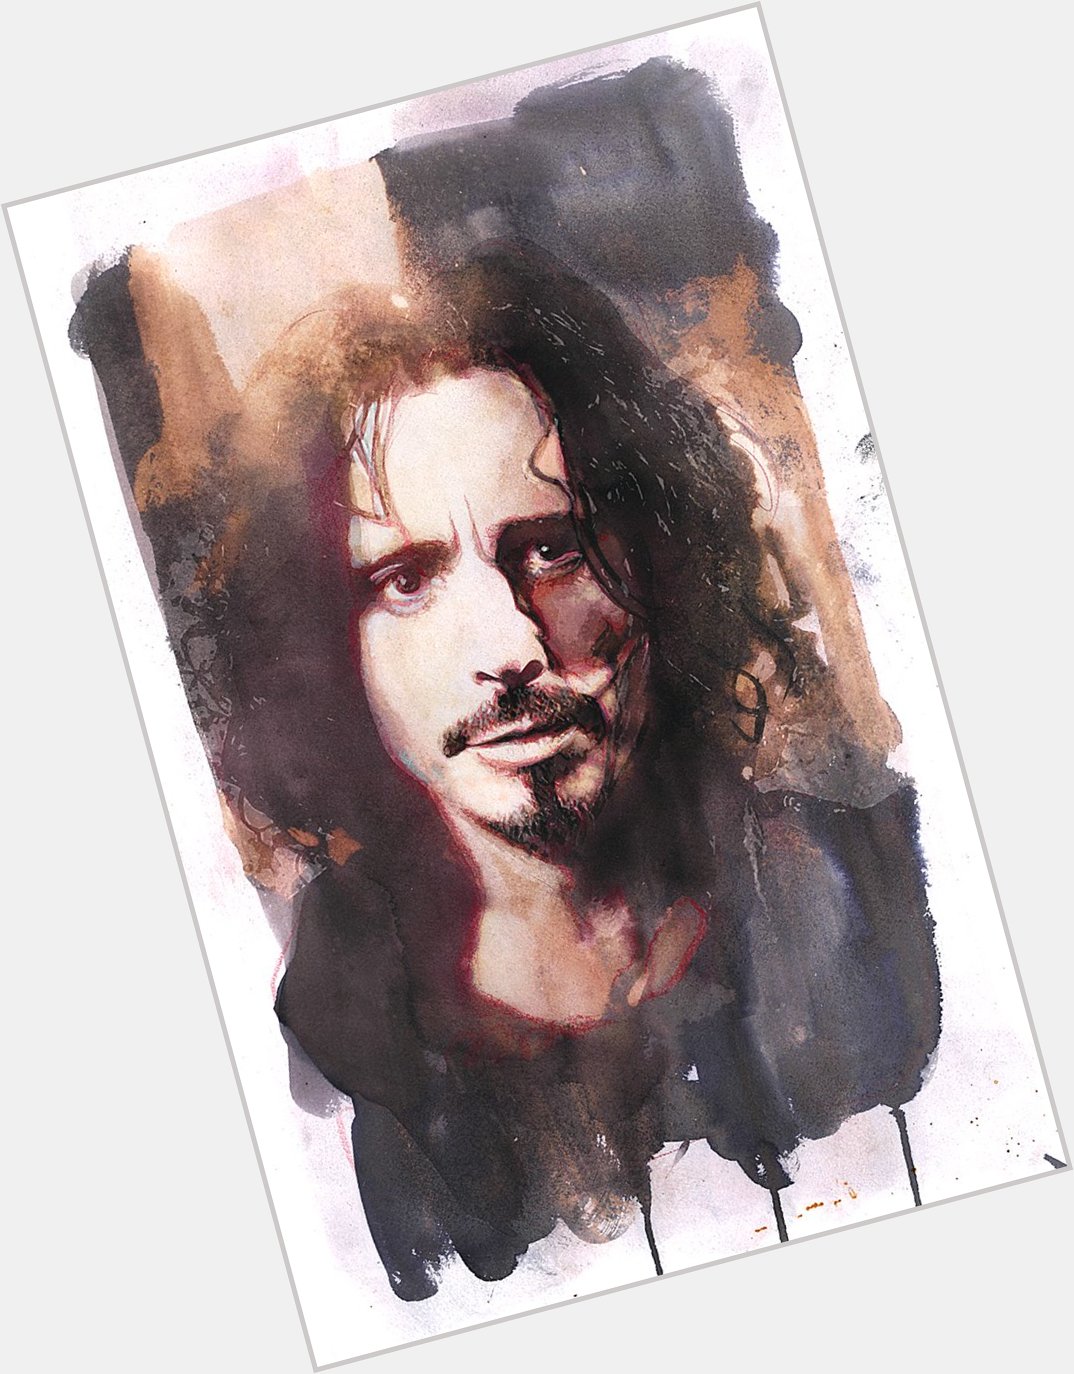 Happy Birthday to Chris Cornell what would have been his 56th. 